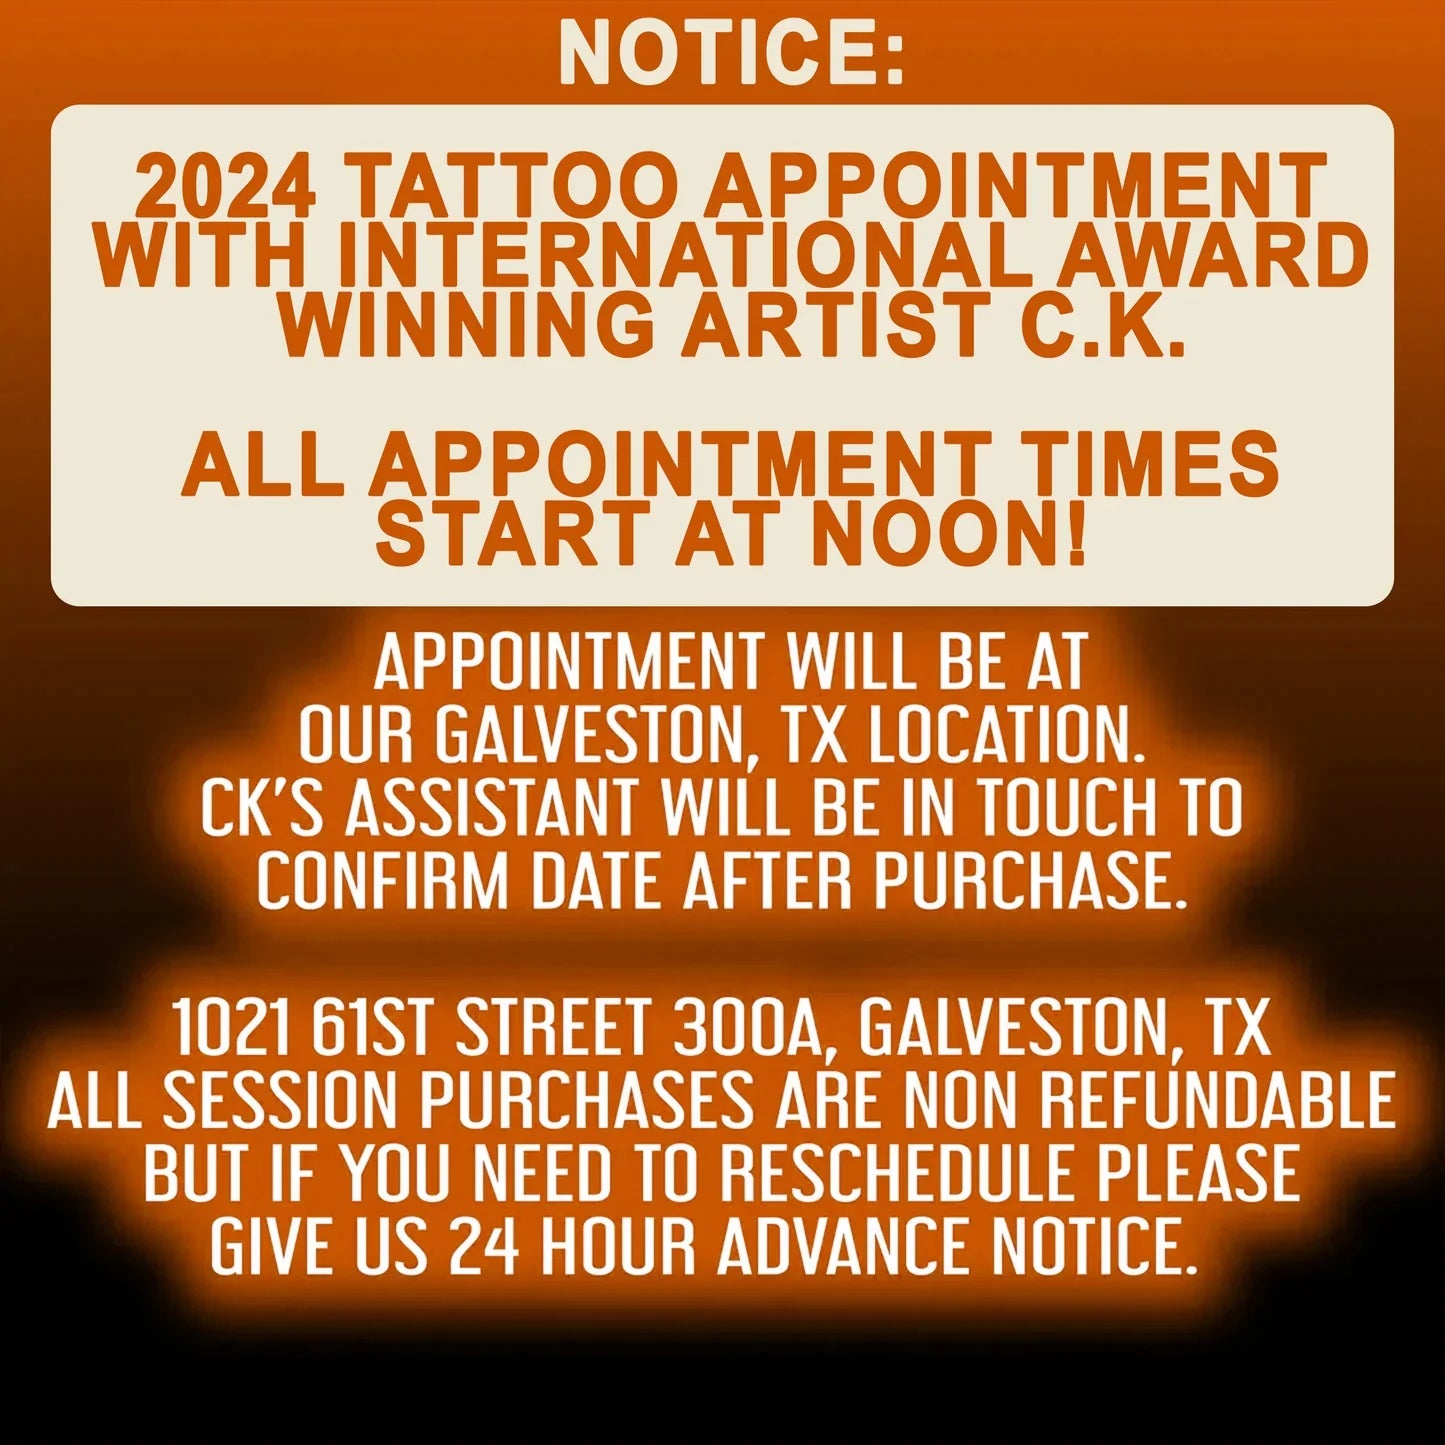 6 hour Tattoo Session with CK April 30th, 2024